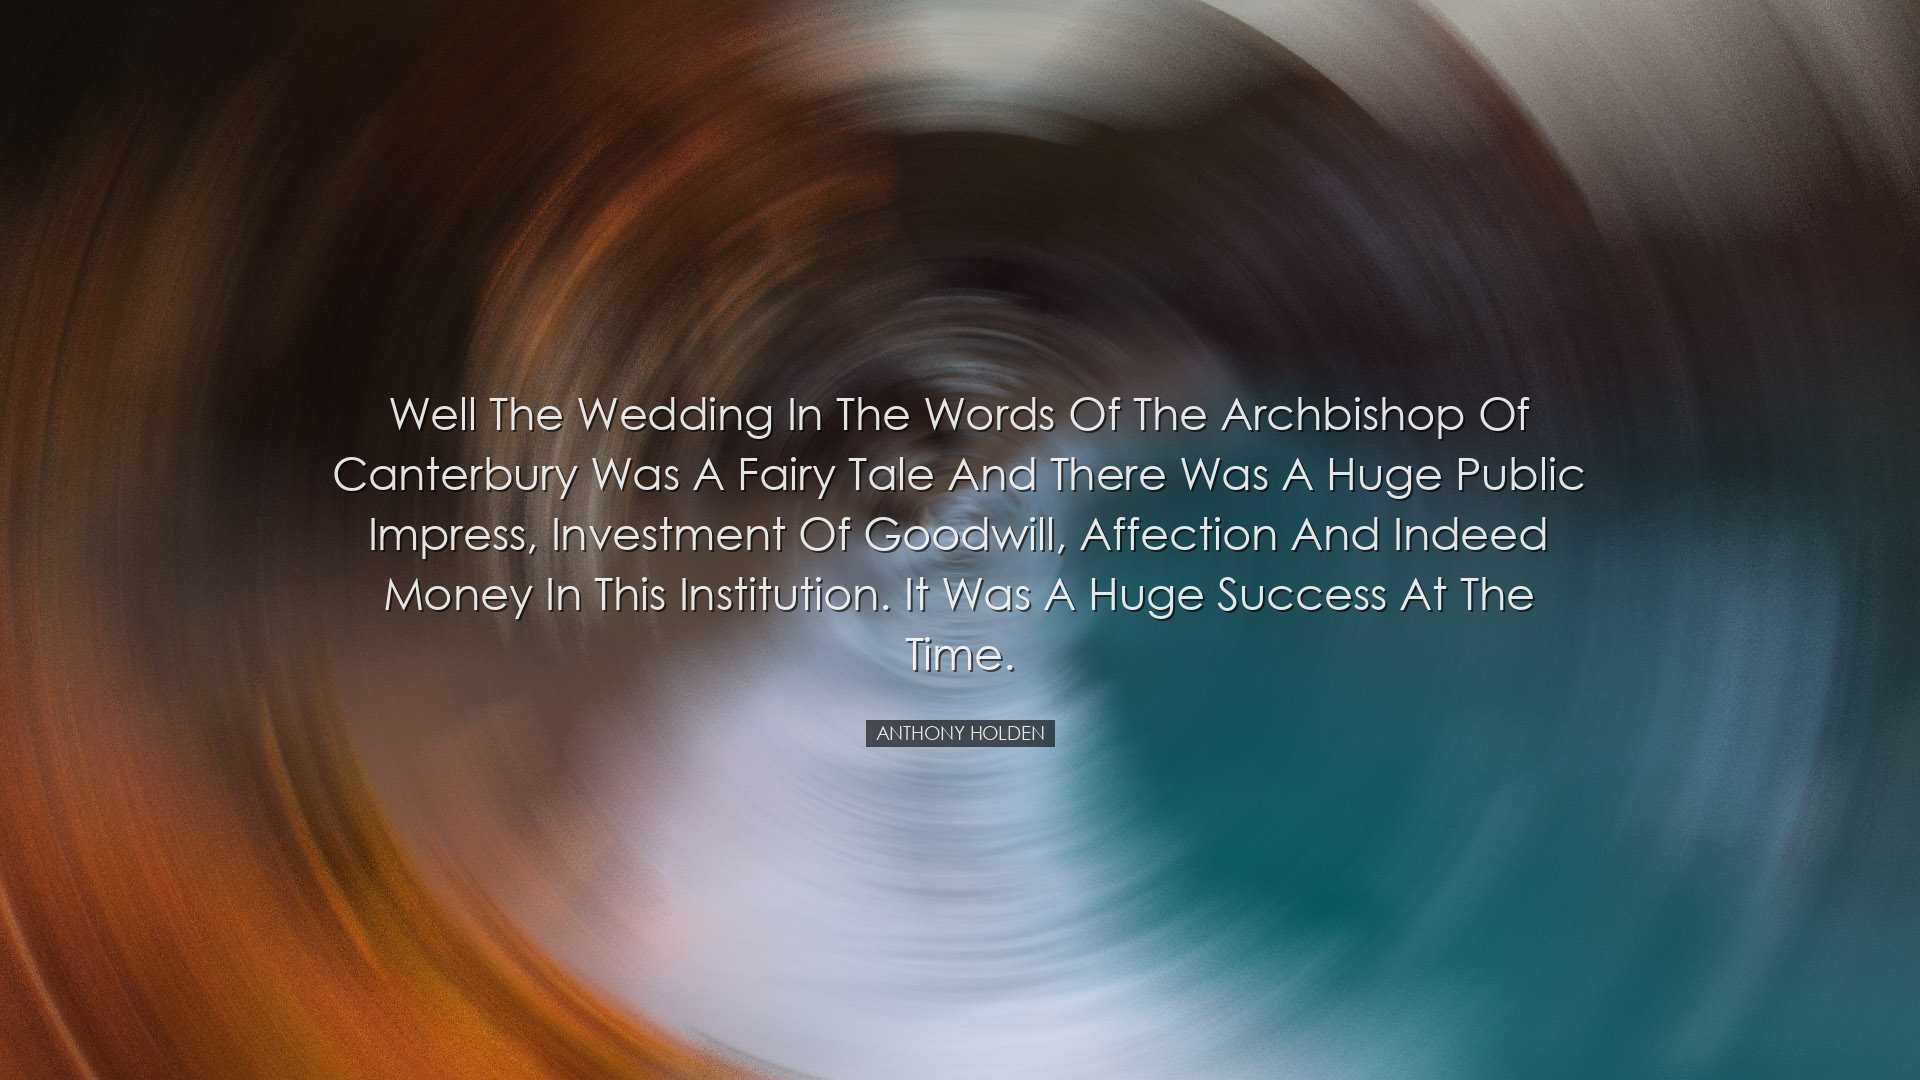 Well the wedding in the words of the Archbishop of Canterbury was